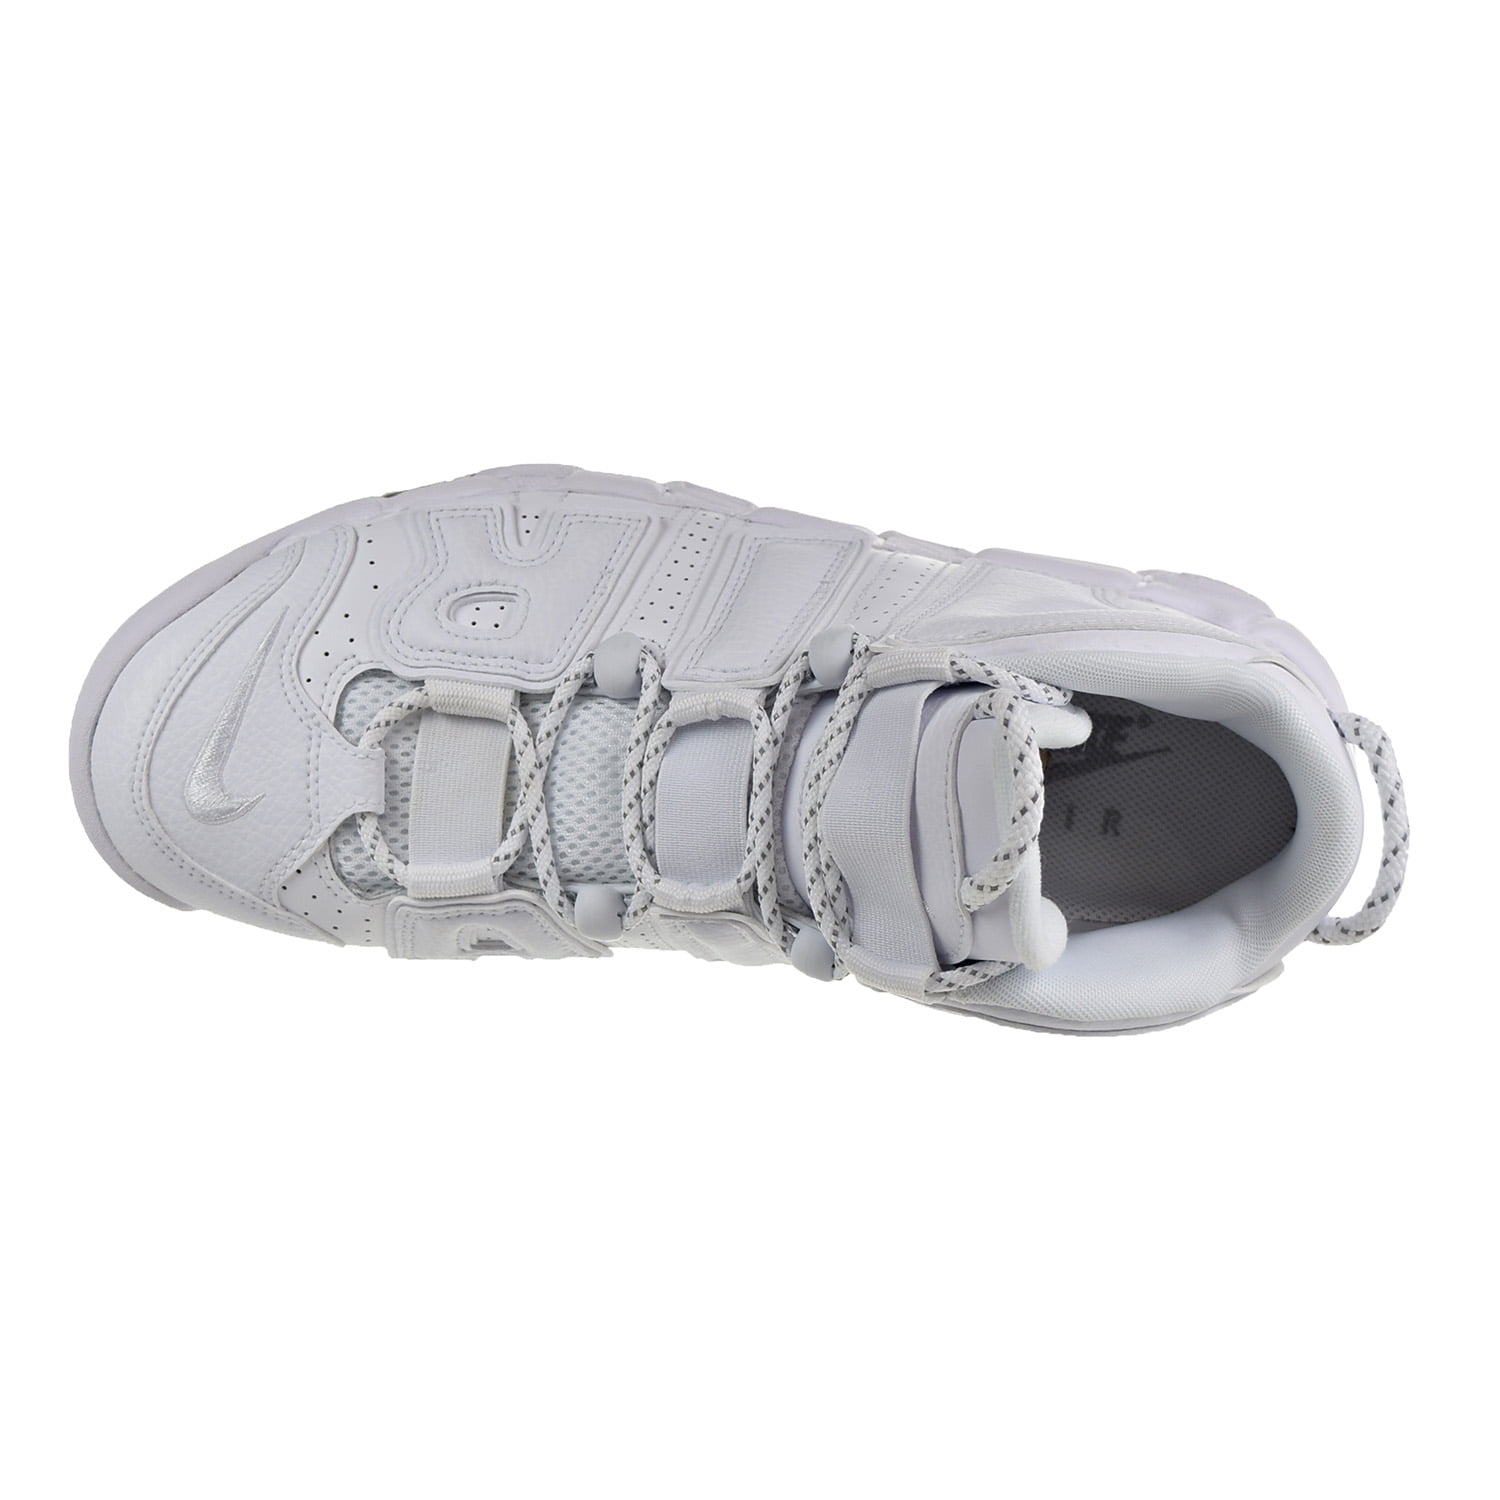 Nike Air More Uptempo '96 All White, 921948-100